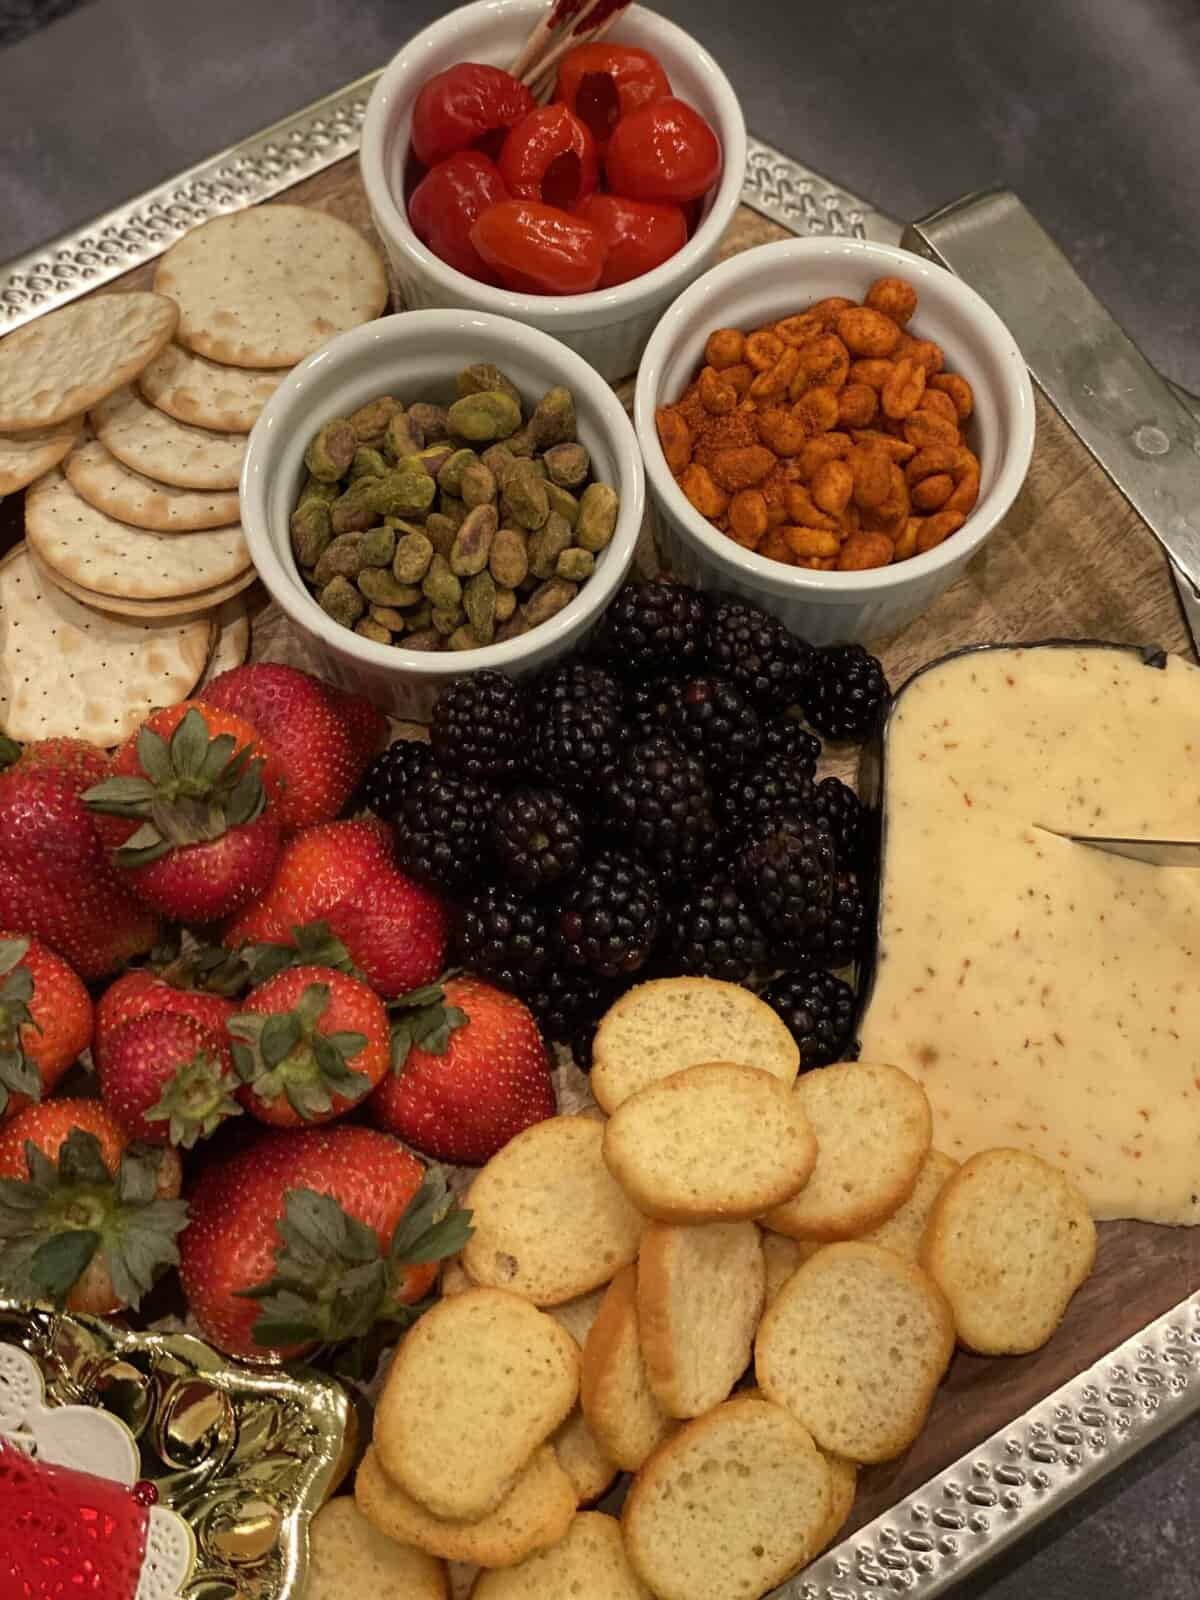 brown and silver board with red strawberries, blackberries, cheese with pepper, orange nuts, green nuts, pickled red peppers, two types of crackers